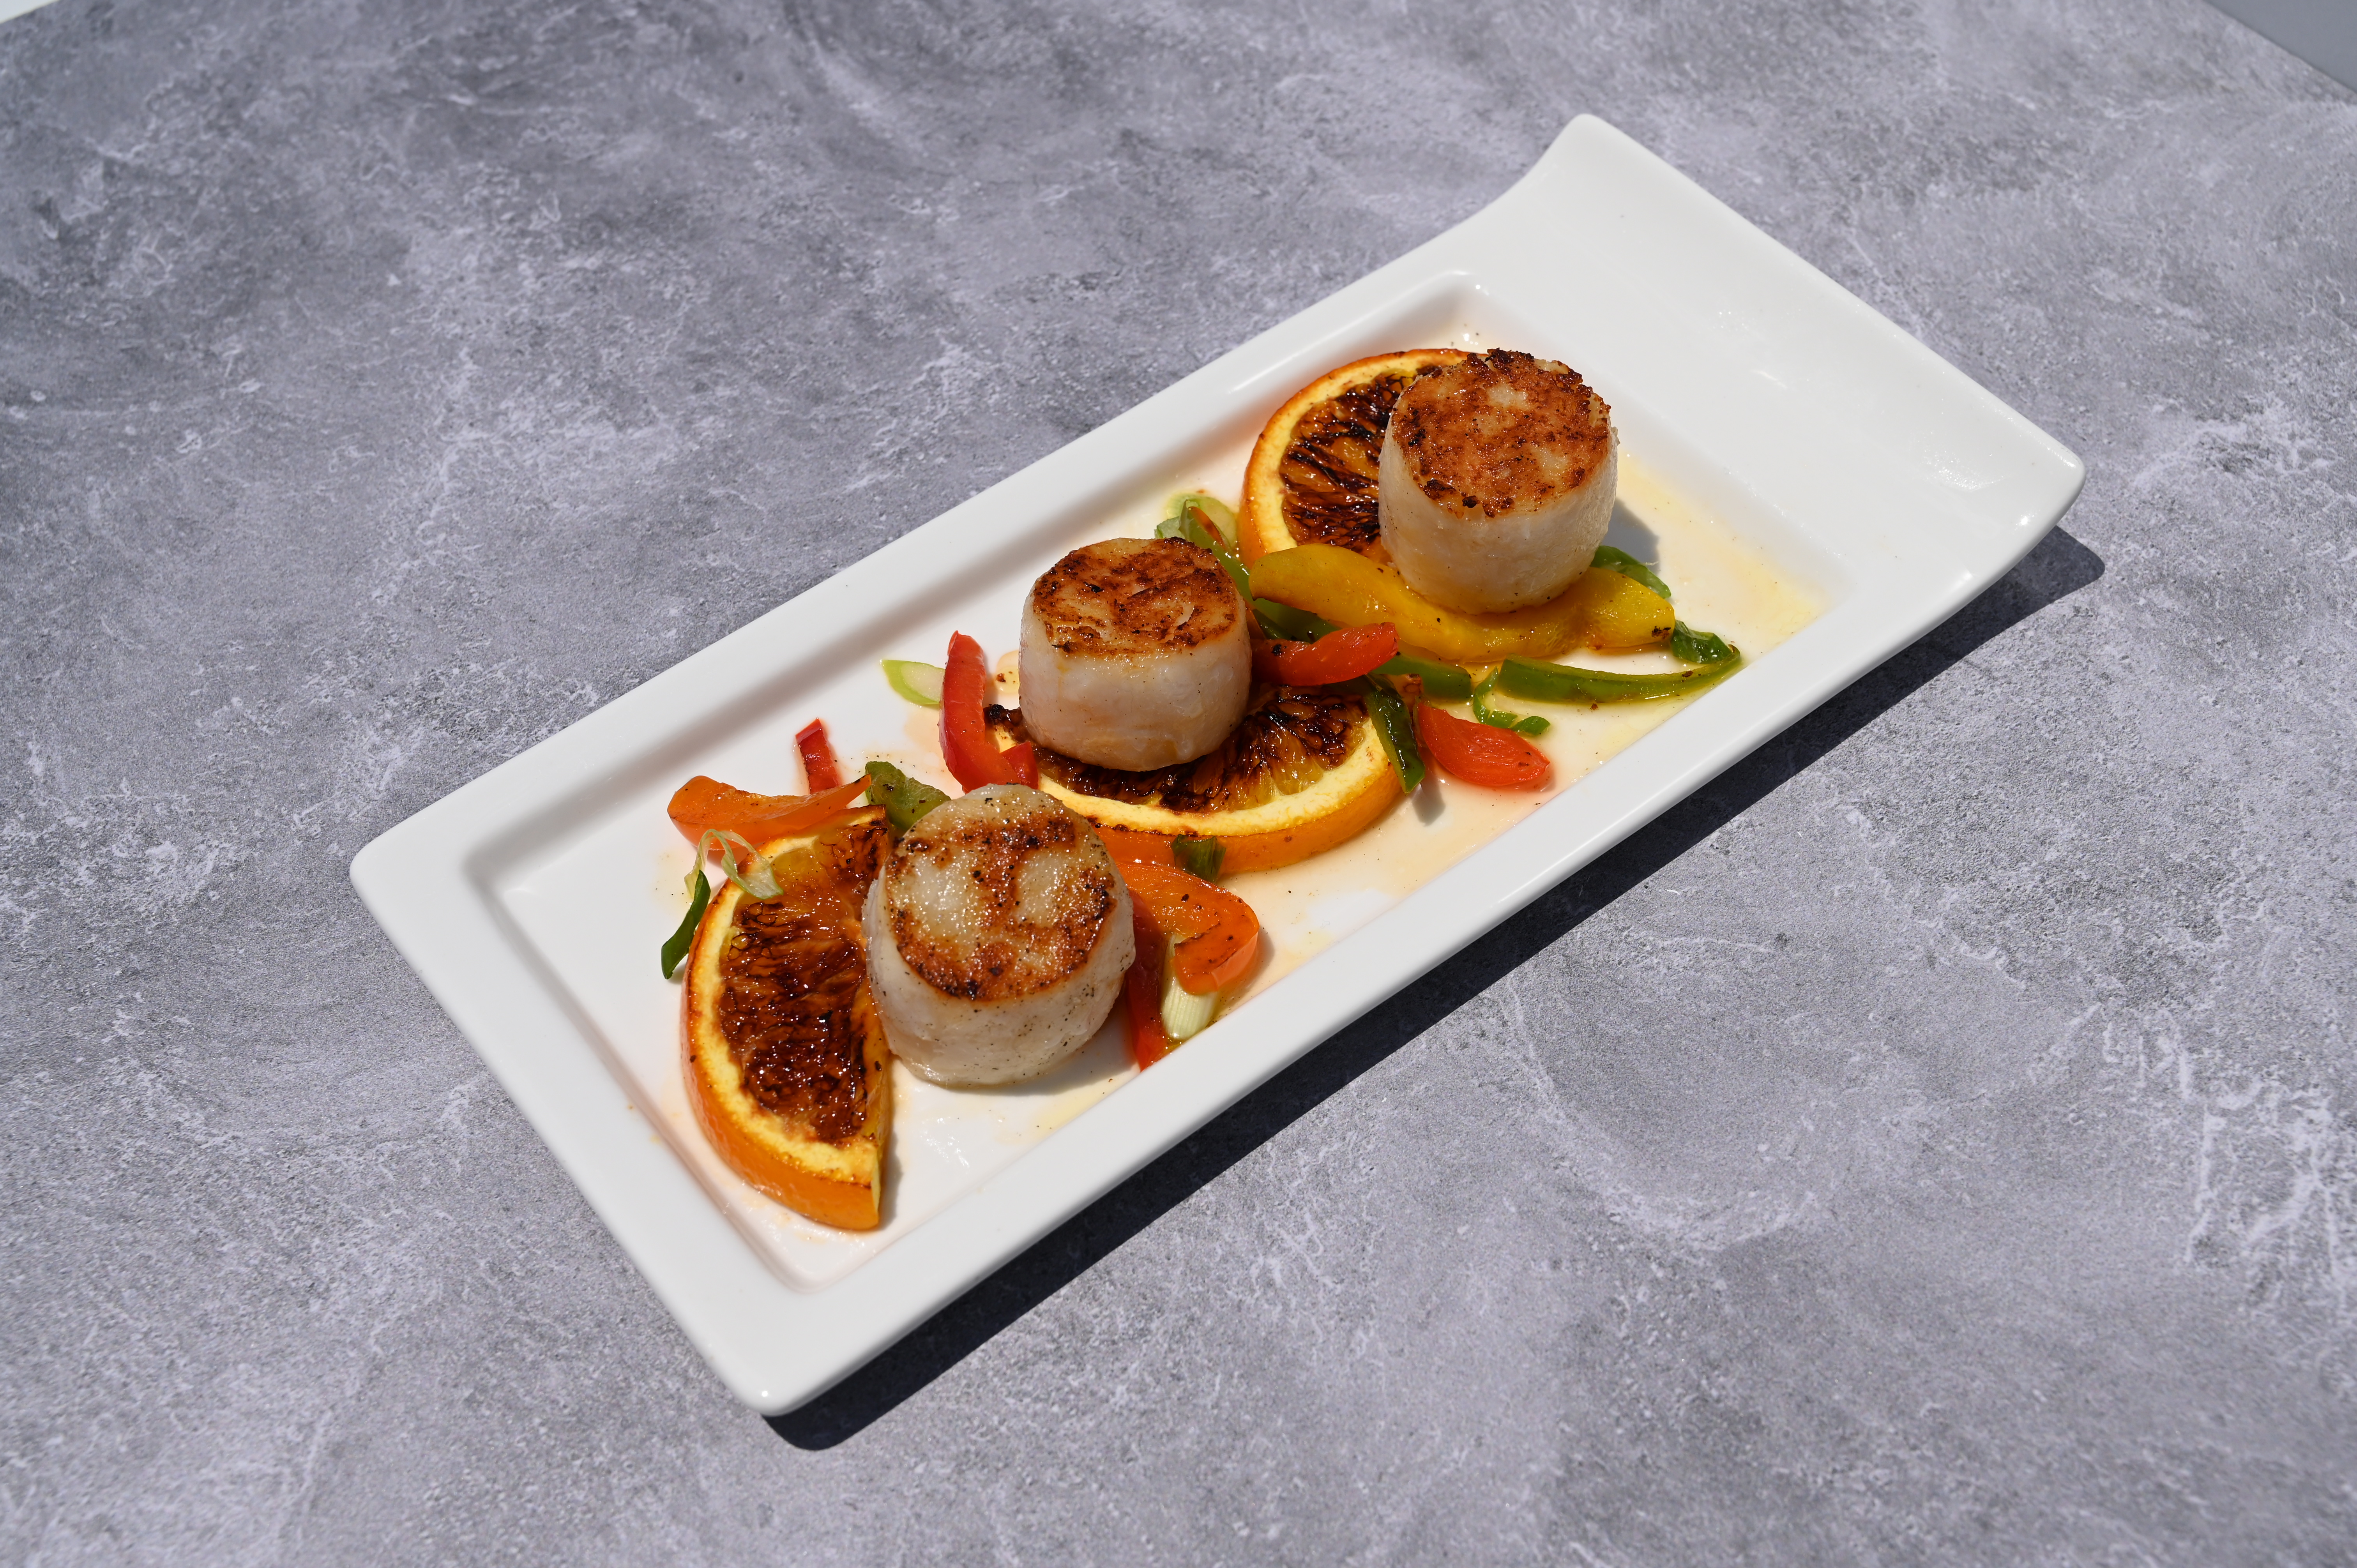 A delicious dish of pan seared scallops